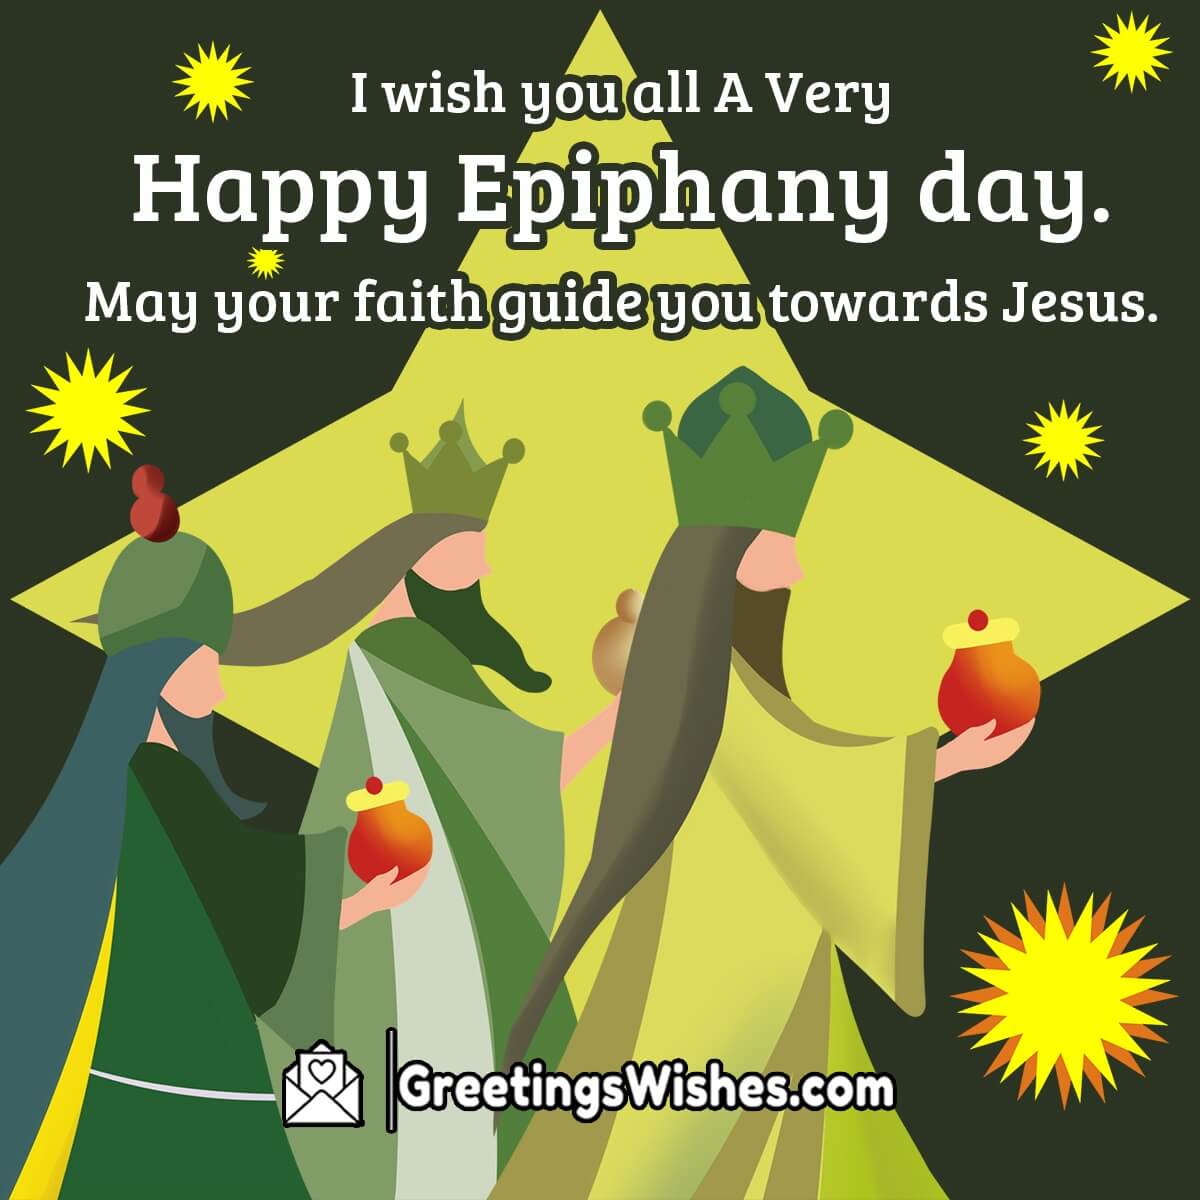 A Very Happy Epiphany Day